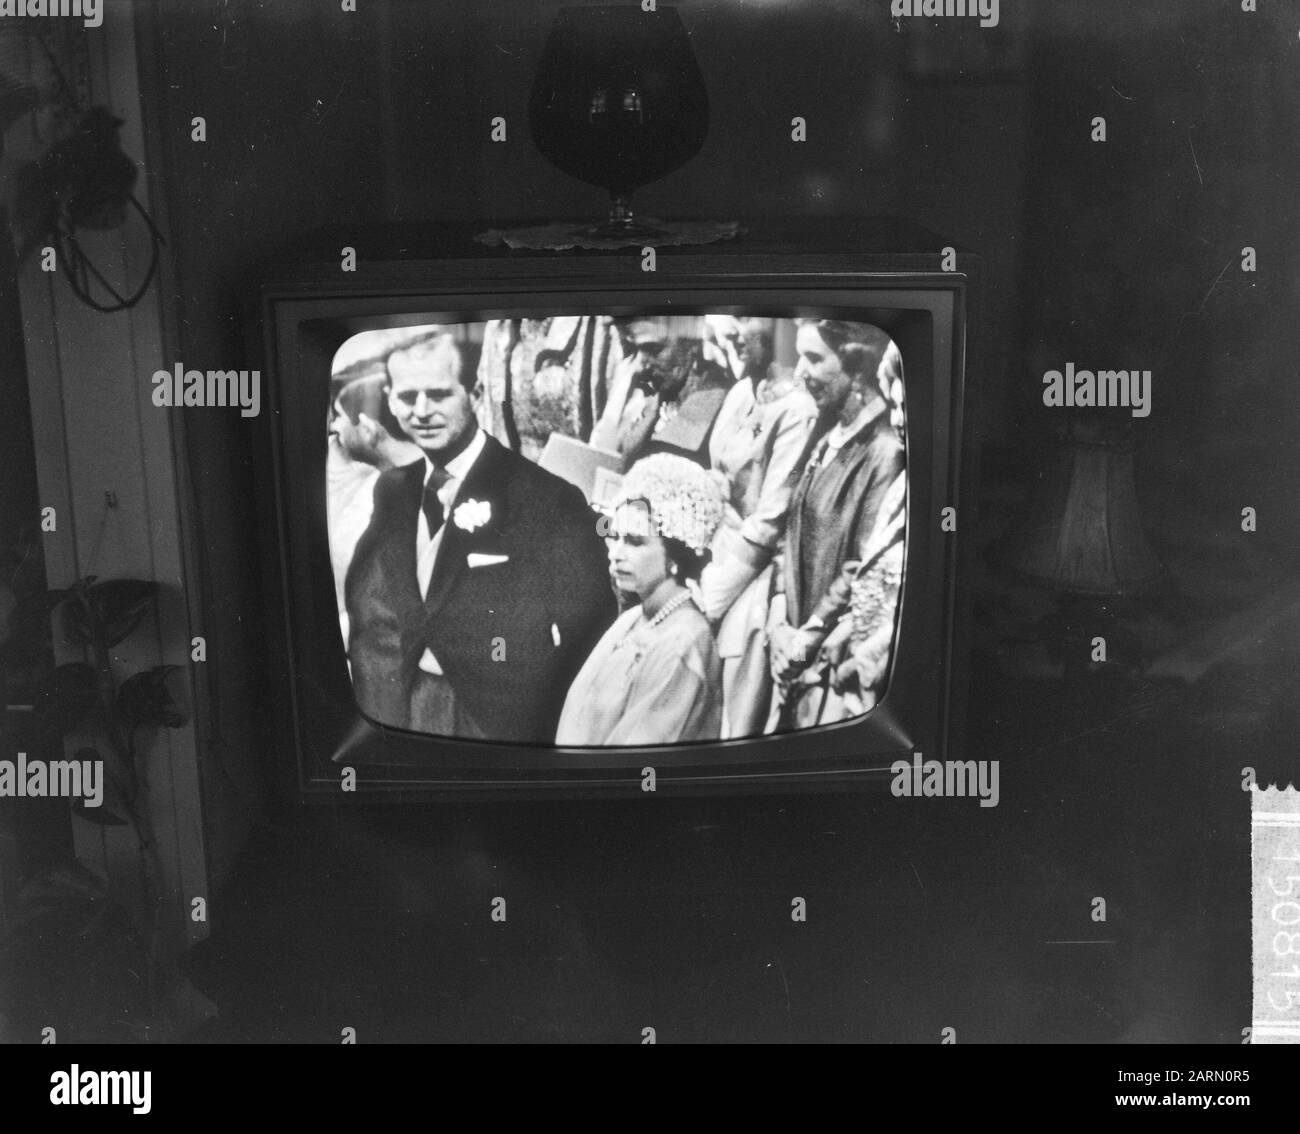 Marriage Alexandra of Kent with Angus Ogilvy in Westminster Abbey in London [photo from TV]. Prince Philip (left) and Queen Elizabeth Date: 24 April 1963 Location: Great Britain, London Keywords: nobility, marriages Personal name: Elizabeth Queen, Philip, Prince of Great Britain Stock Photo